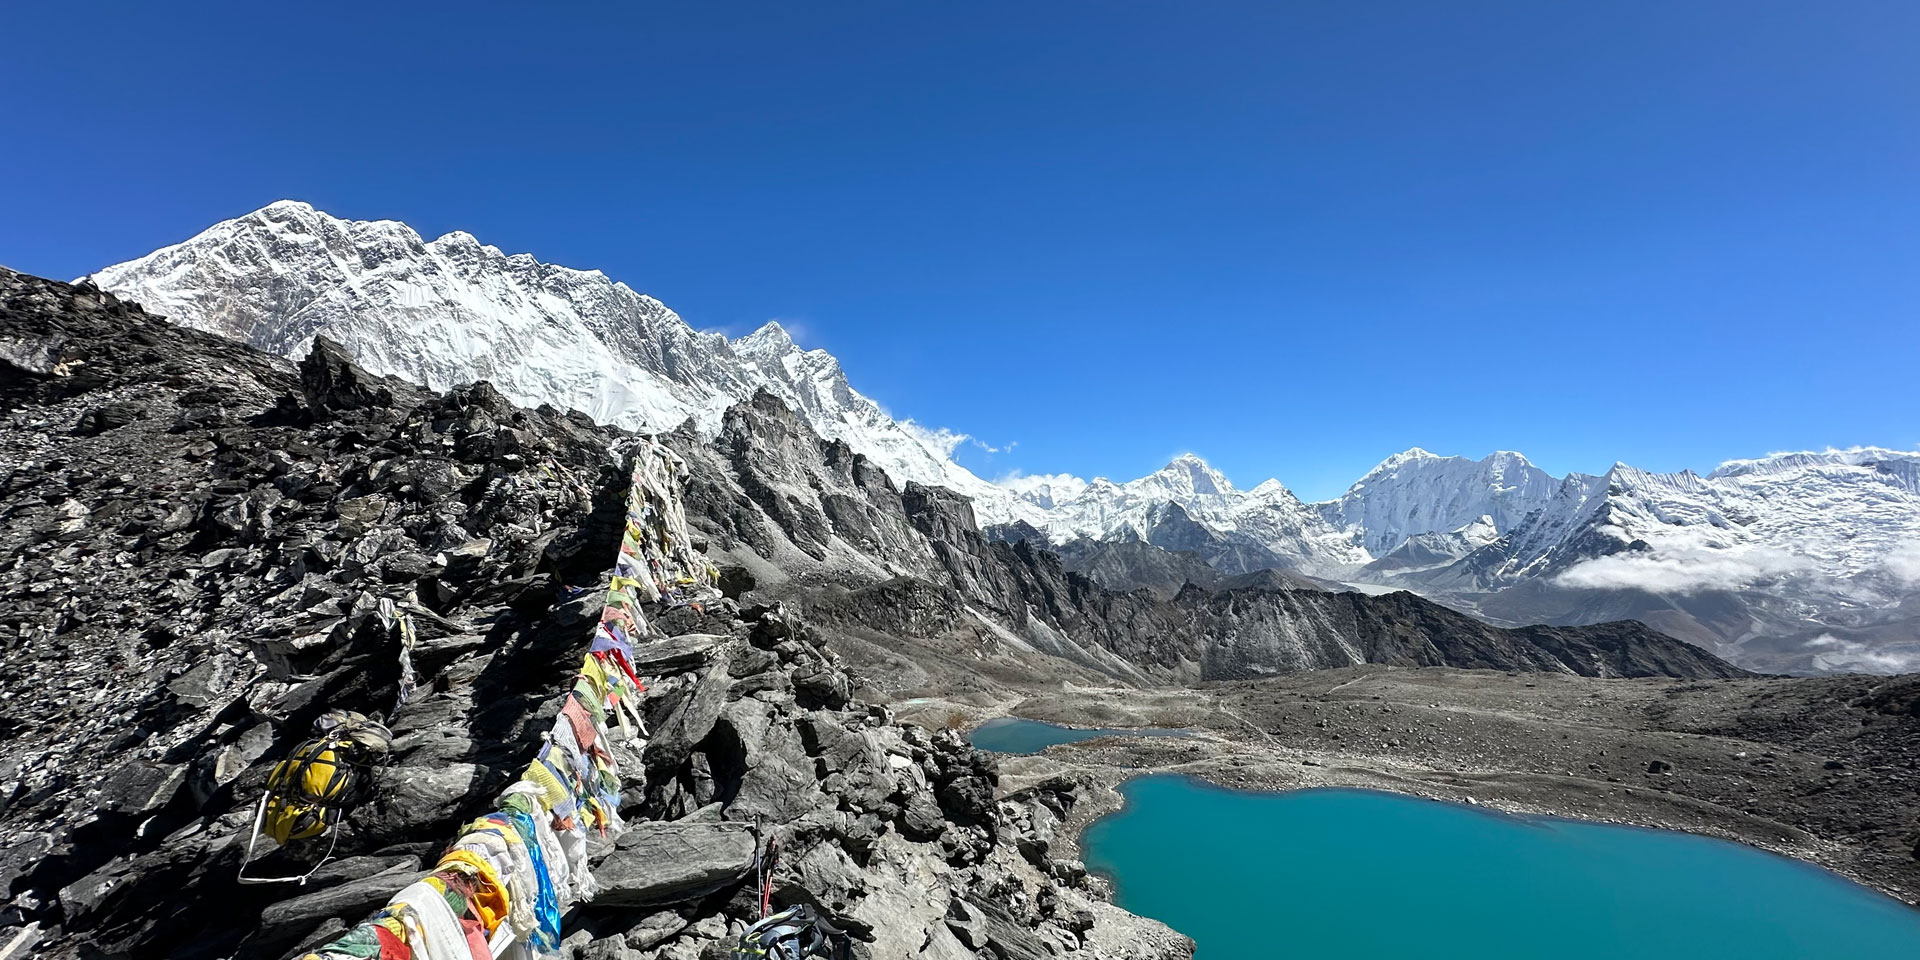 Lhotse wall, Makalu and Baruntse seen from Kongma La pass with prayer flags on the 3 passes trek in the Everest area of Nepal